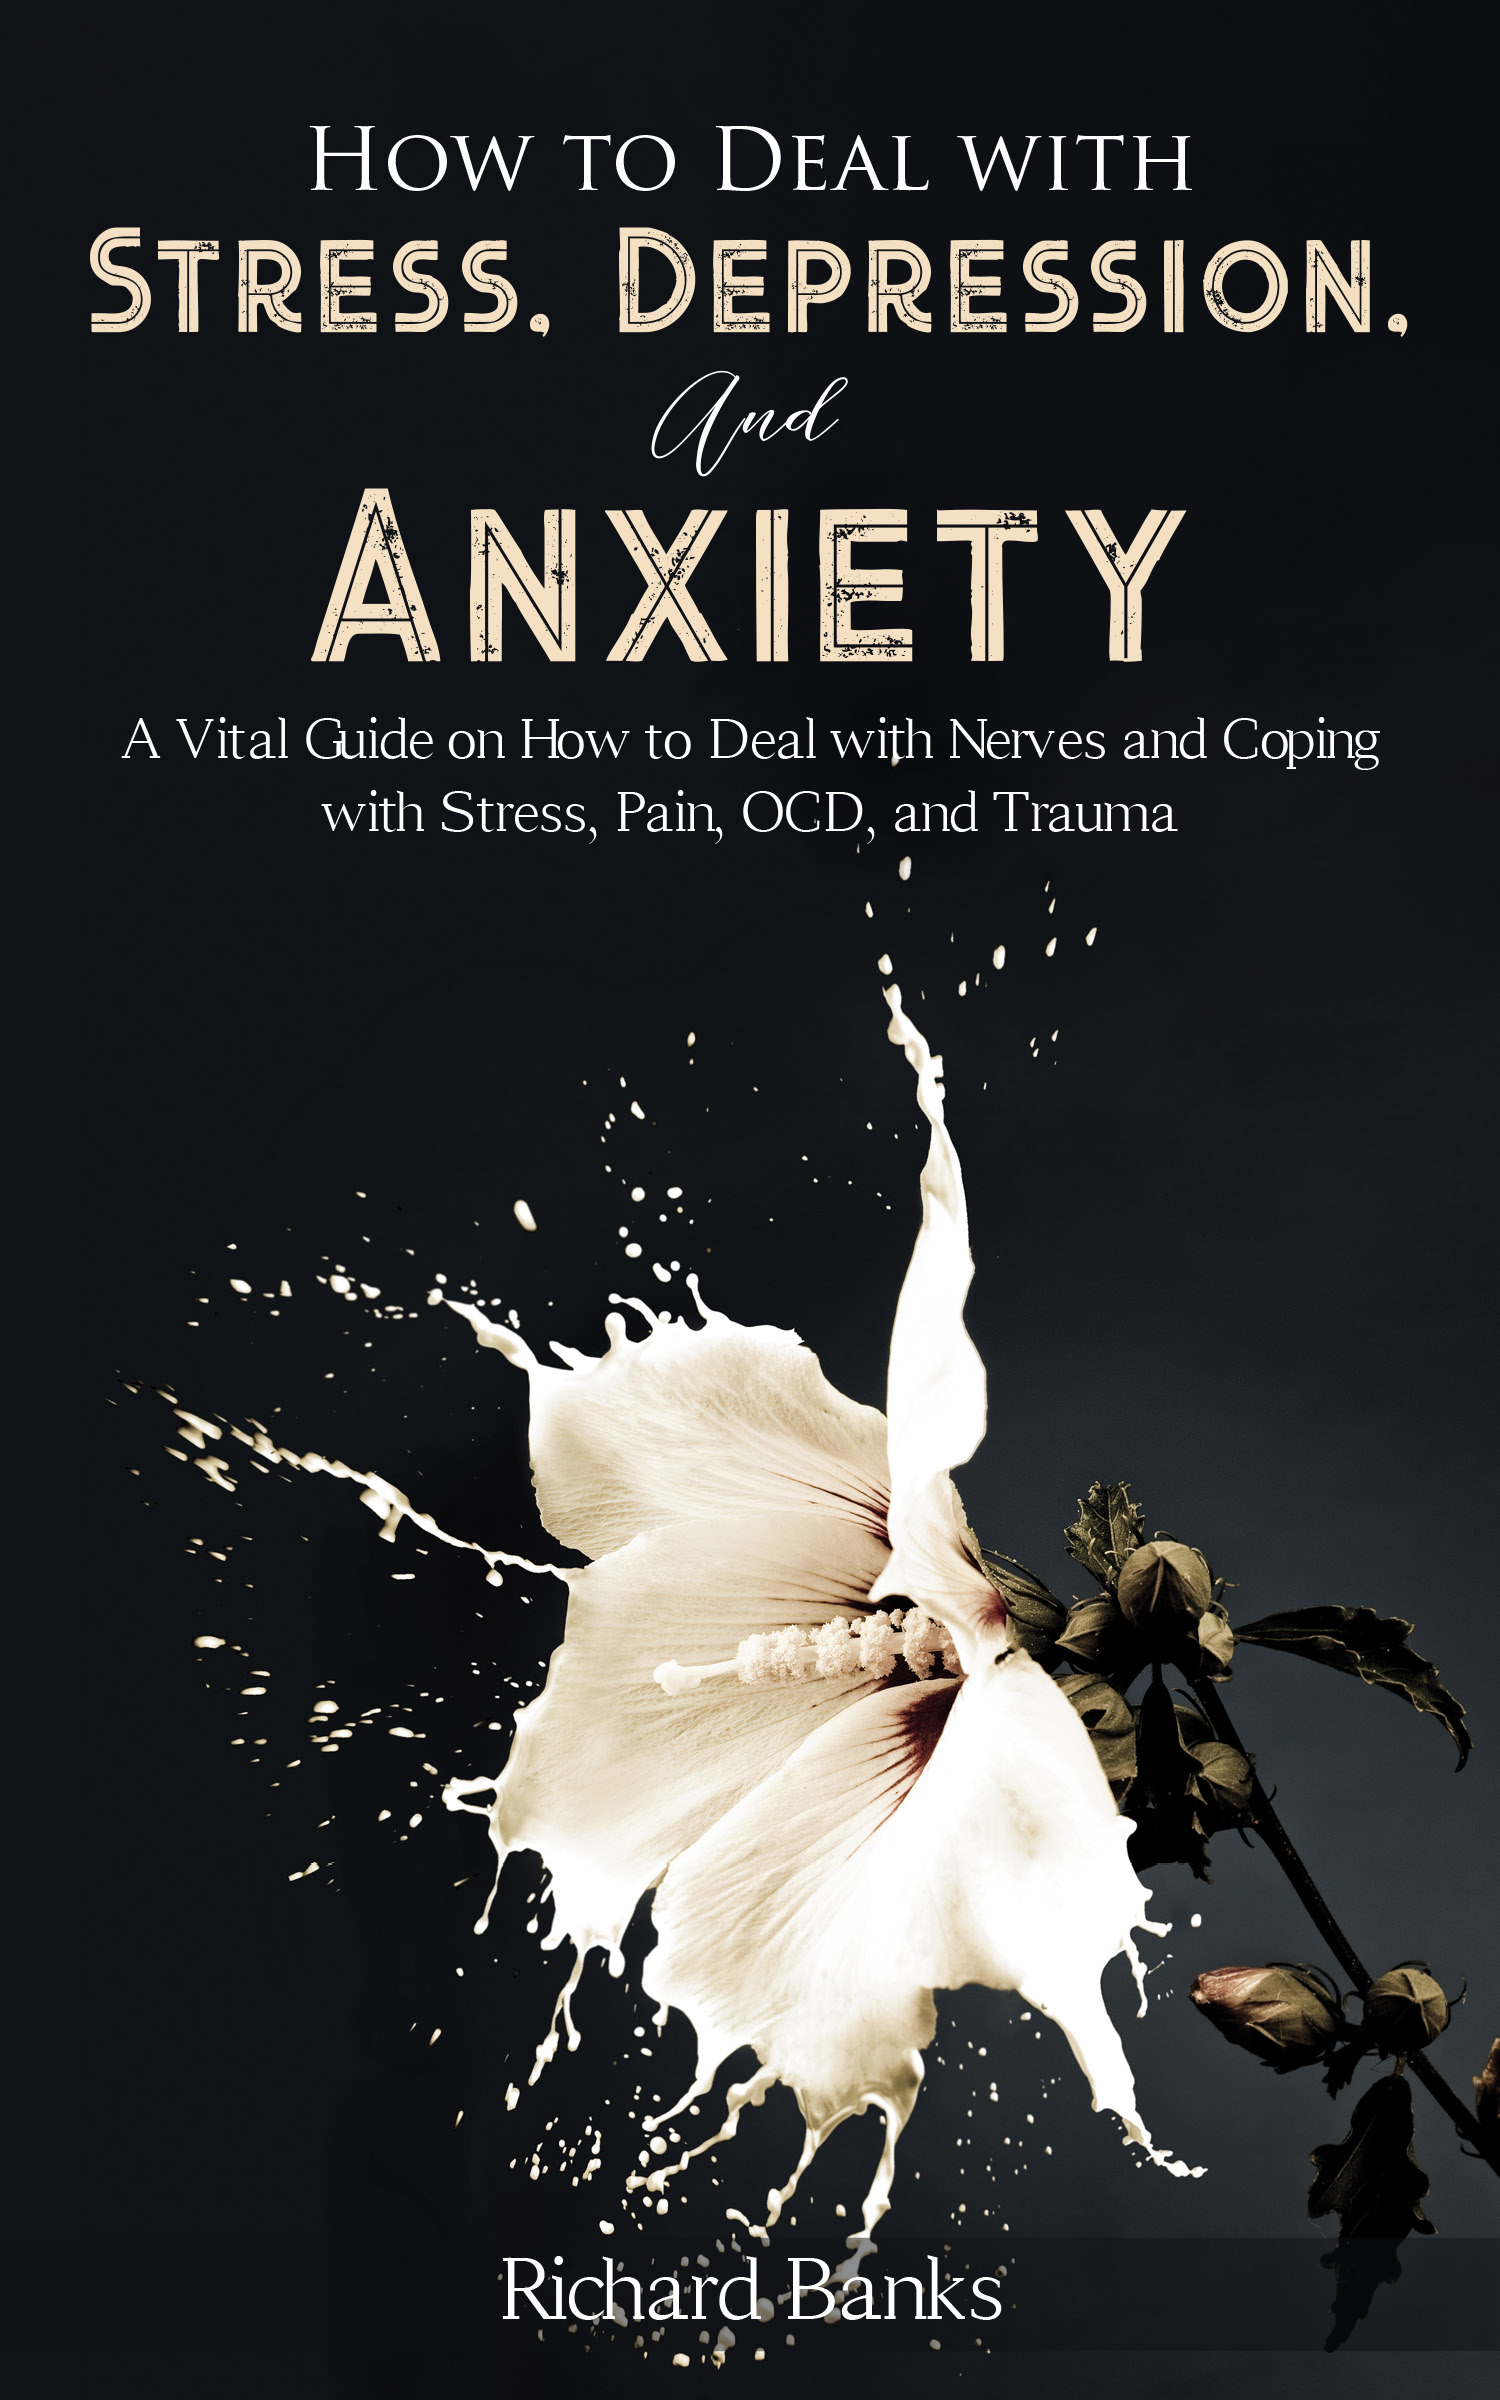 FREE: How to Deal with Stress, Depression, and Anxiety: A Vital Guide on How to Deal with Nerves and Coping with Stress, Pain, OCD and Trauma by Richard Banks